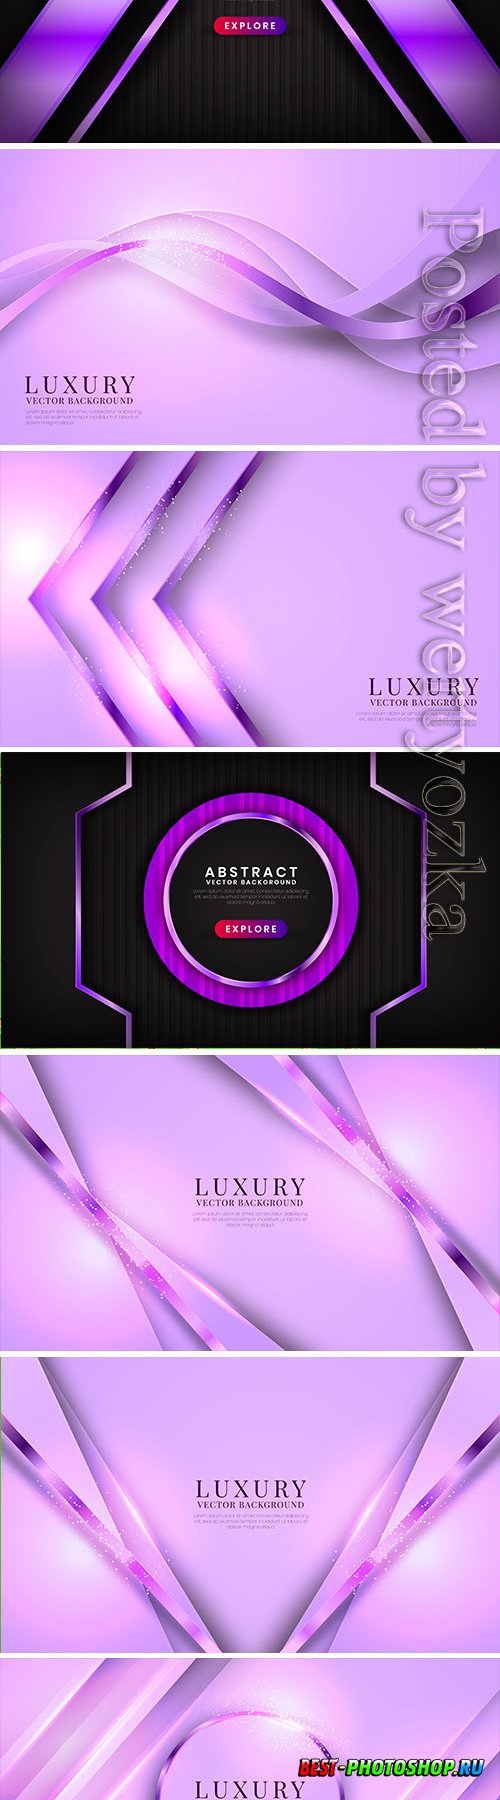 Abstract 3d purple luxury background with shiny metallic waves effect